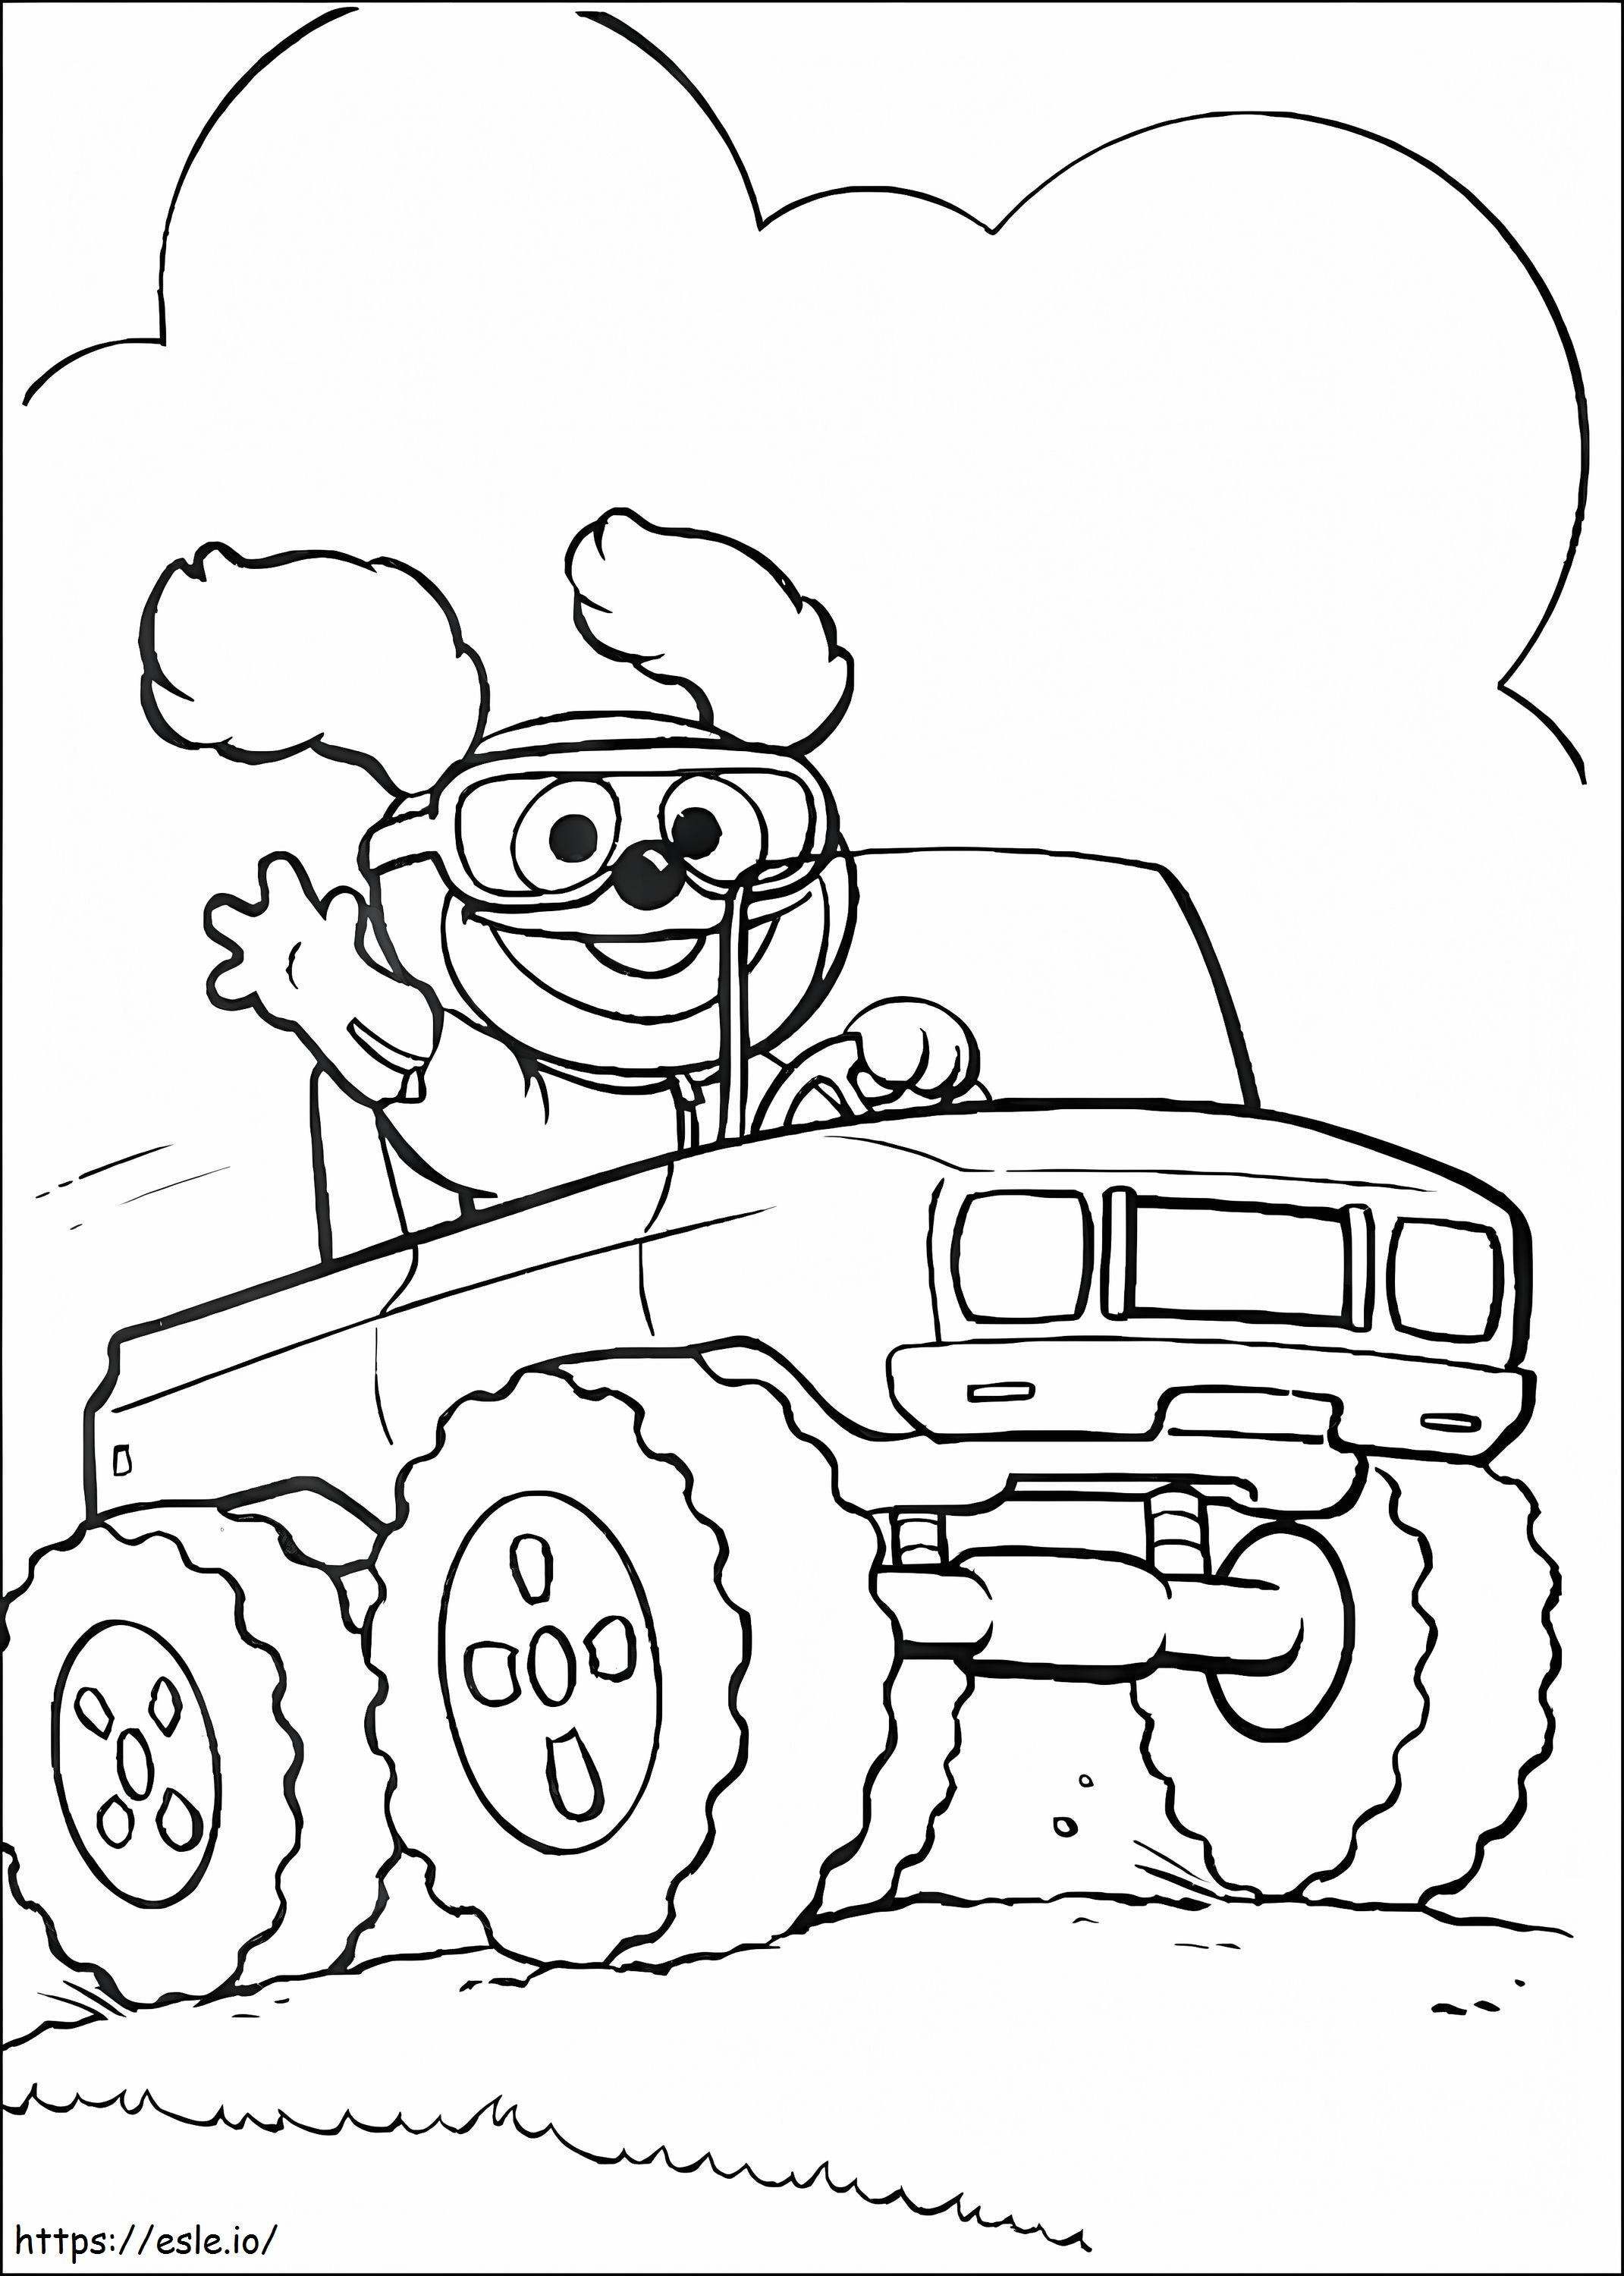 Baby Rowlf Drives A Car coloring page